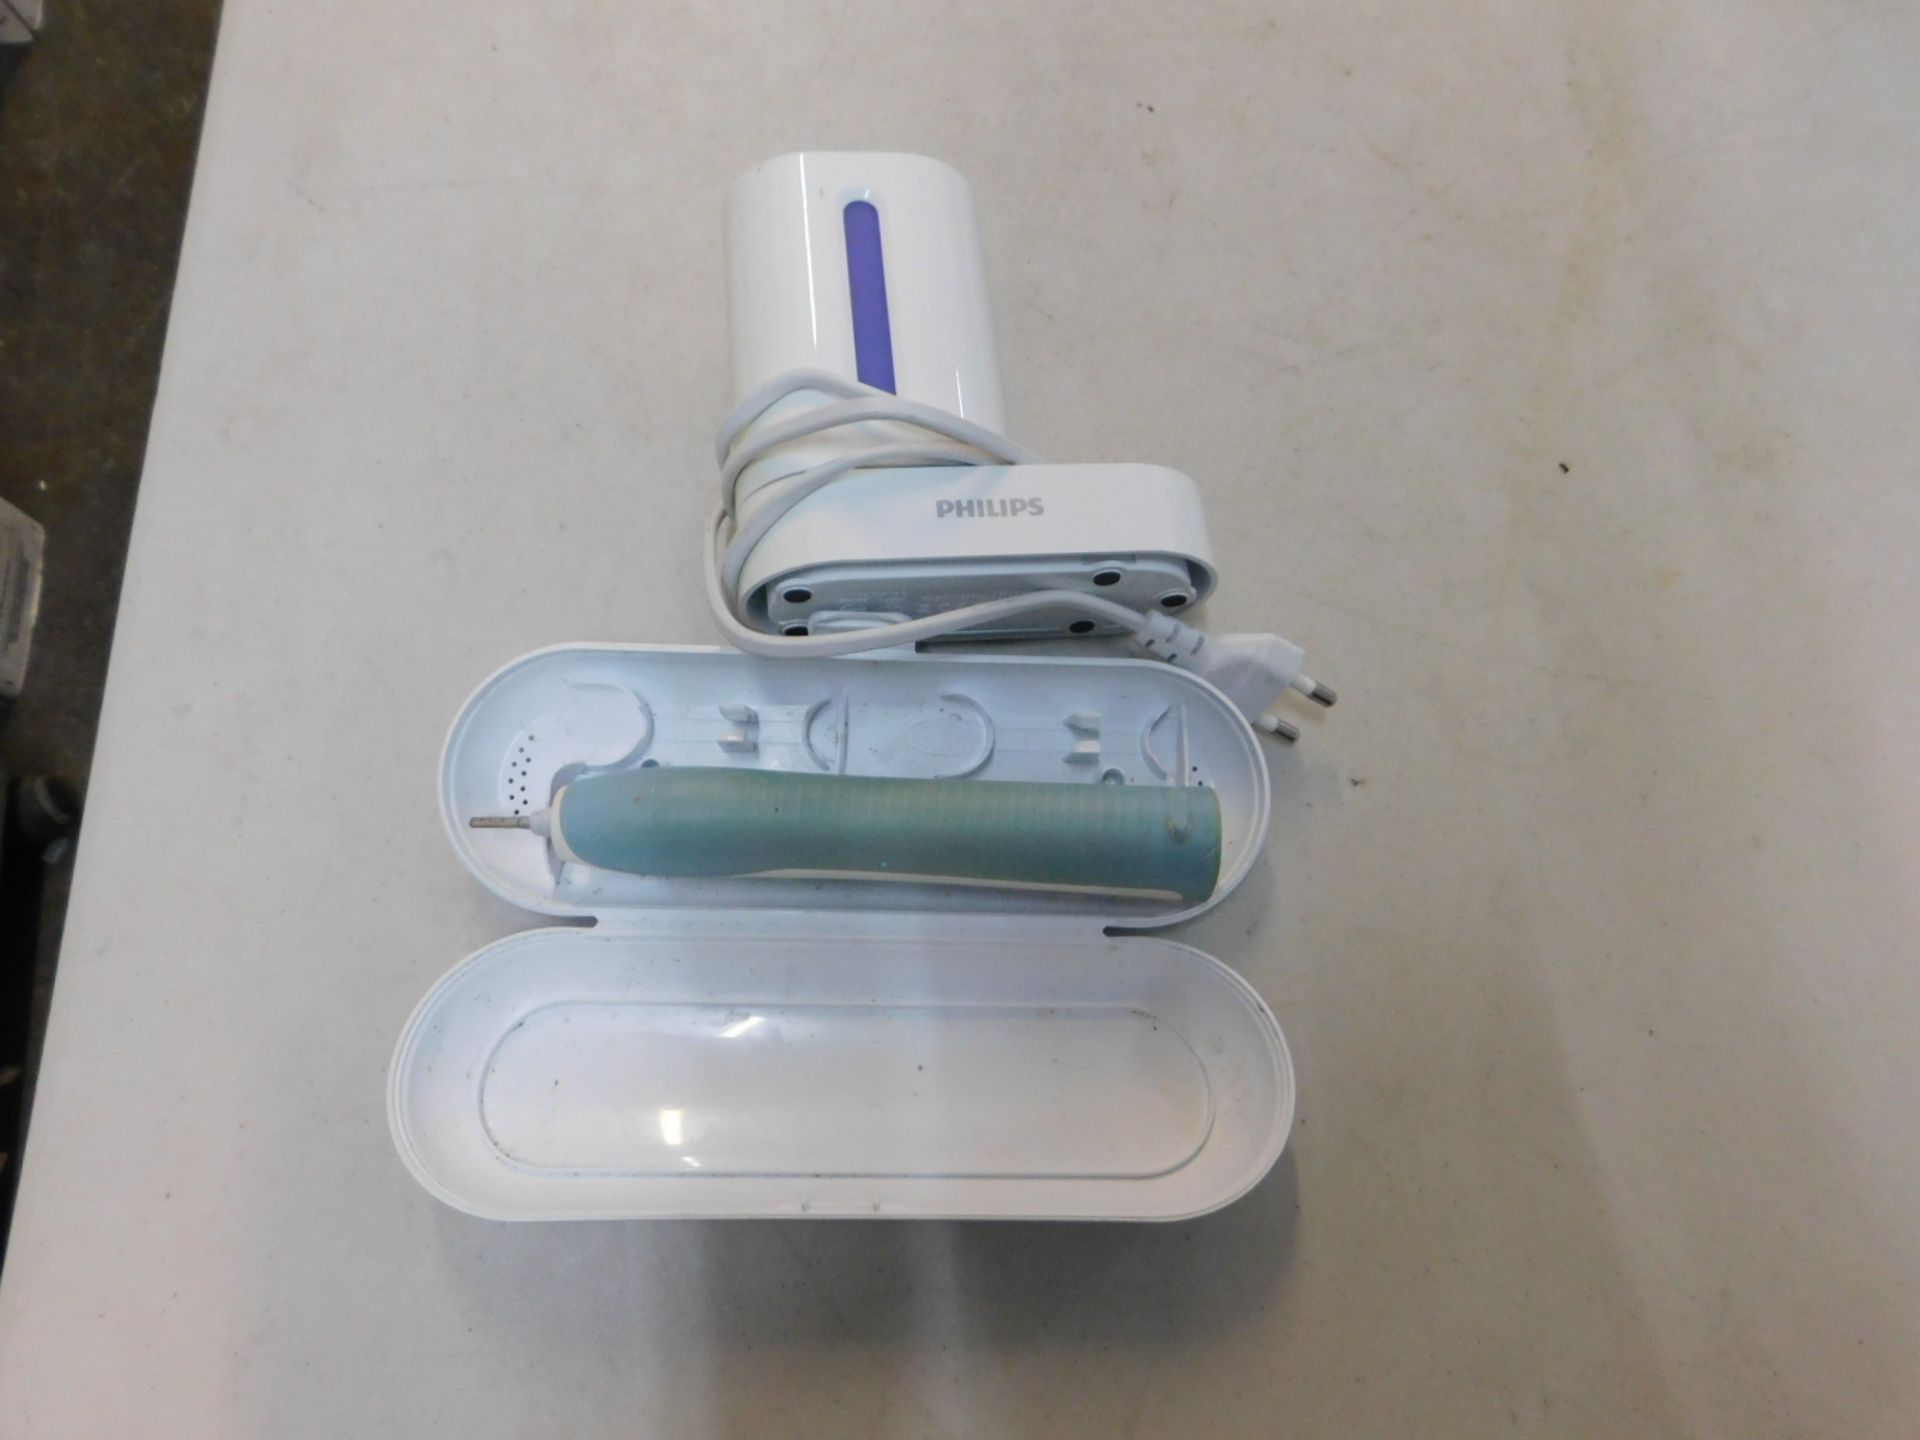 1 PHILLIPS SONICARE FLEX CARE RECHARGABLE SONIC ELECTRIC TOOTHBRUSH RRP Â£149.99